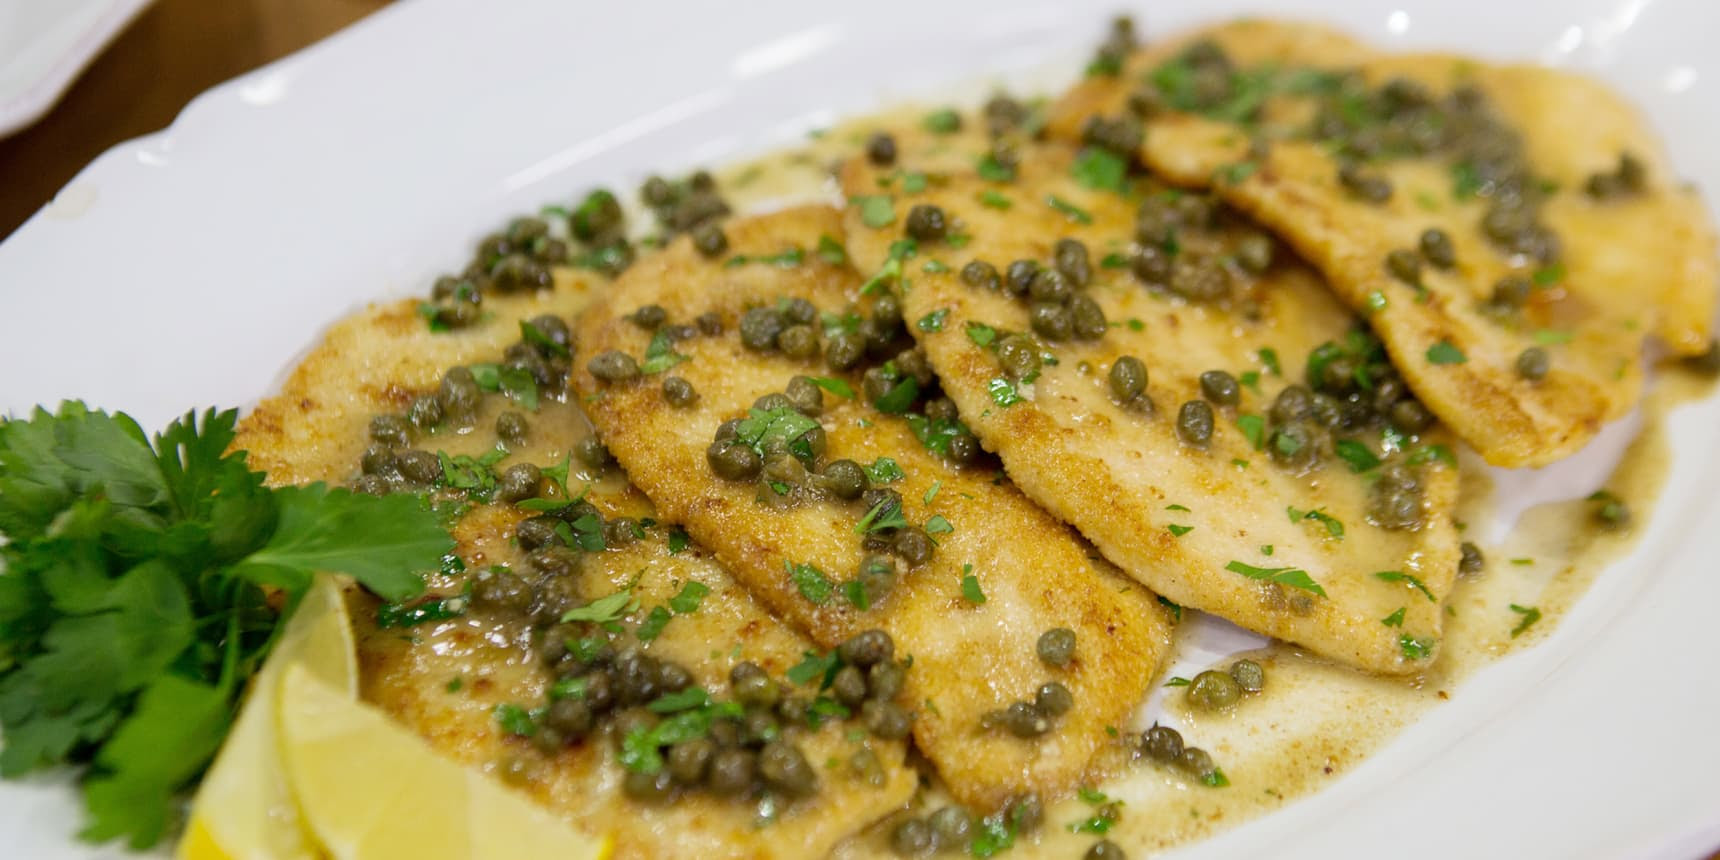  Achieve your life and health goals with easy tips Laura-vitale-parmesan-crusted-chicken-piccata-today-180105-tease